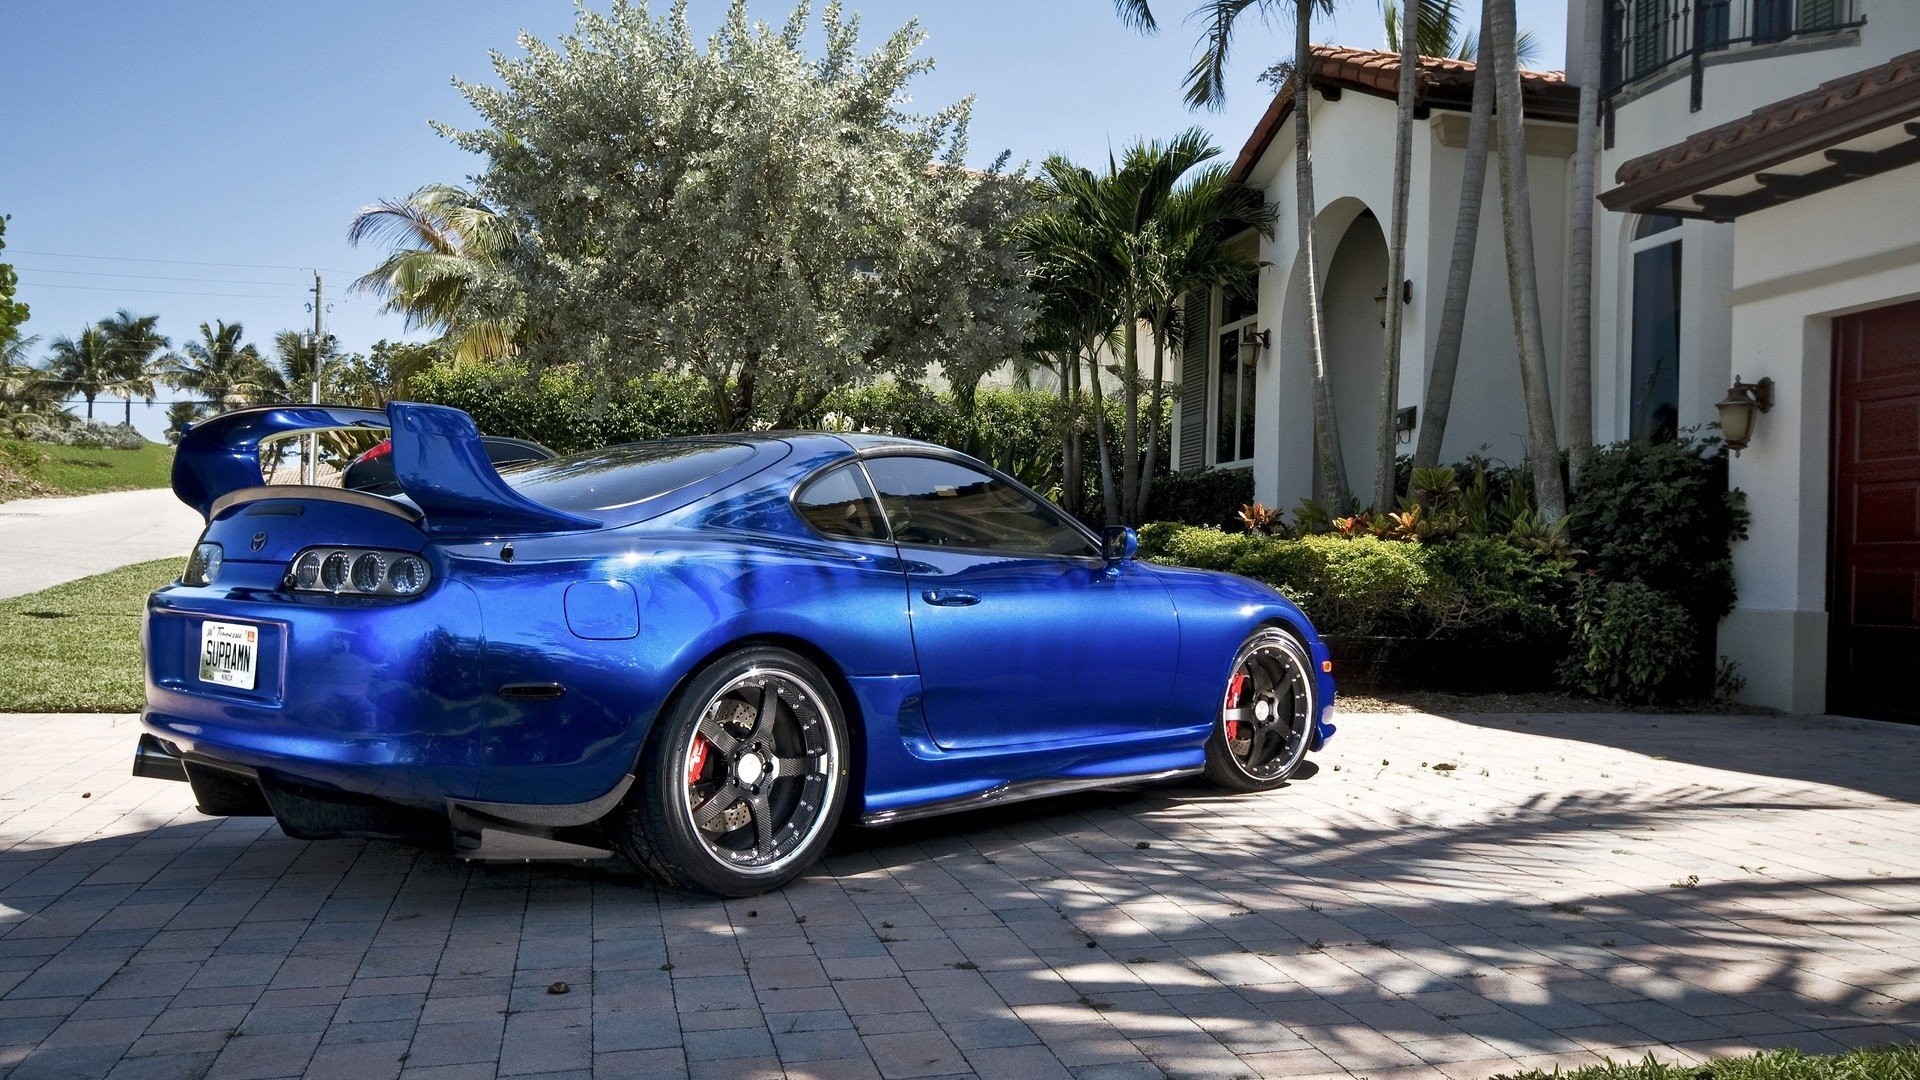 1920x1080 Blue Cars Jdm Toyota Supra Tuning Vehicles K Full Hd Iphone Android